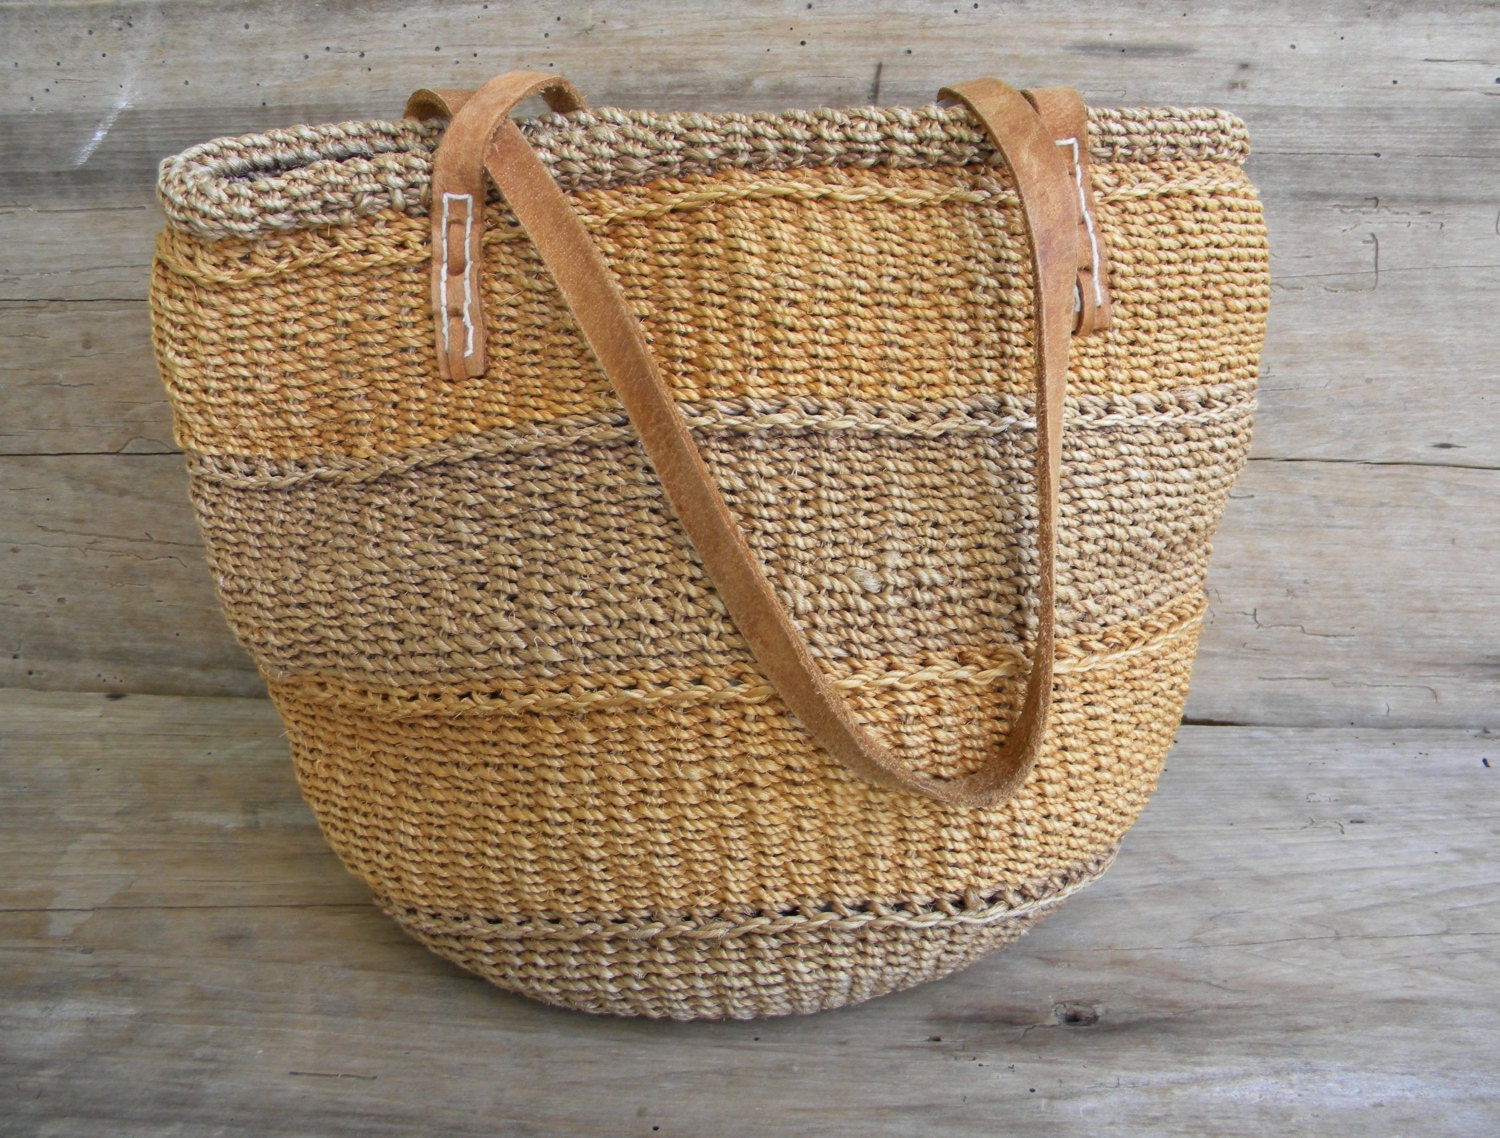 Vintage Woven Straw Bag with Leather Handles / Sisal Market